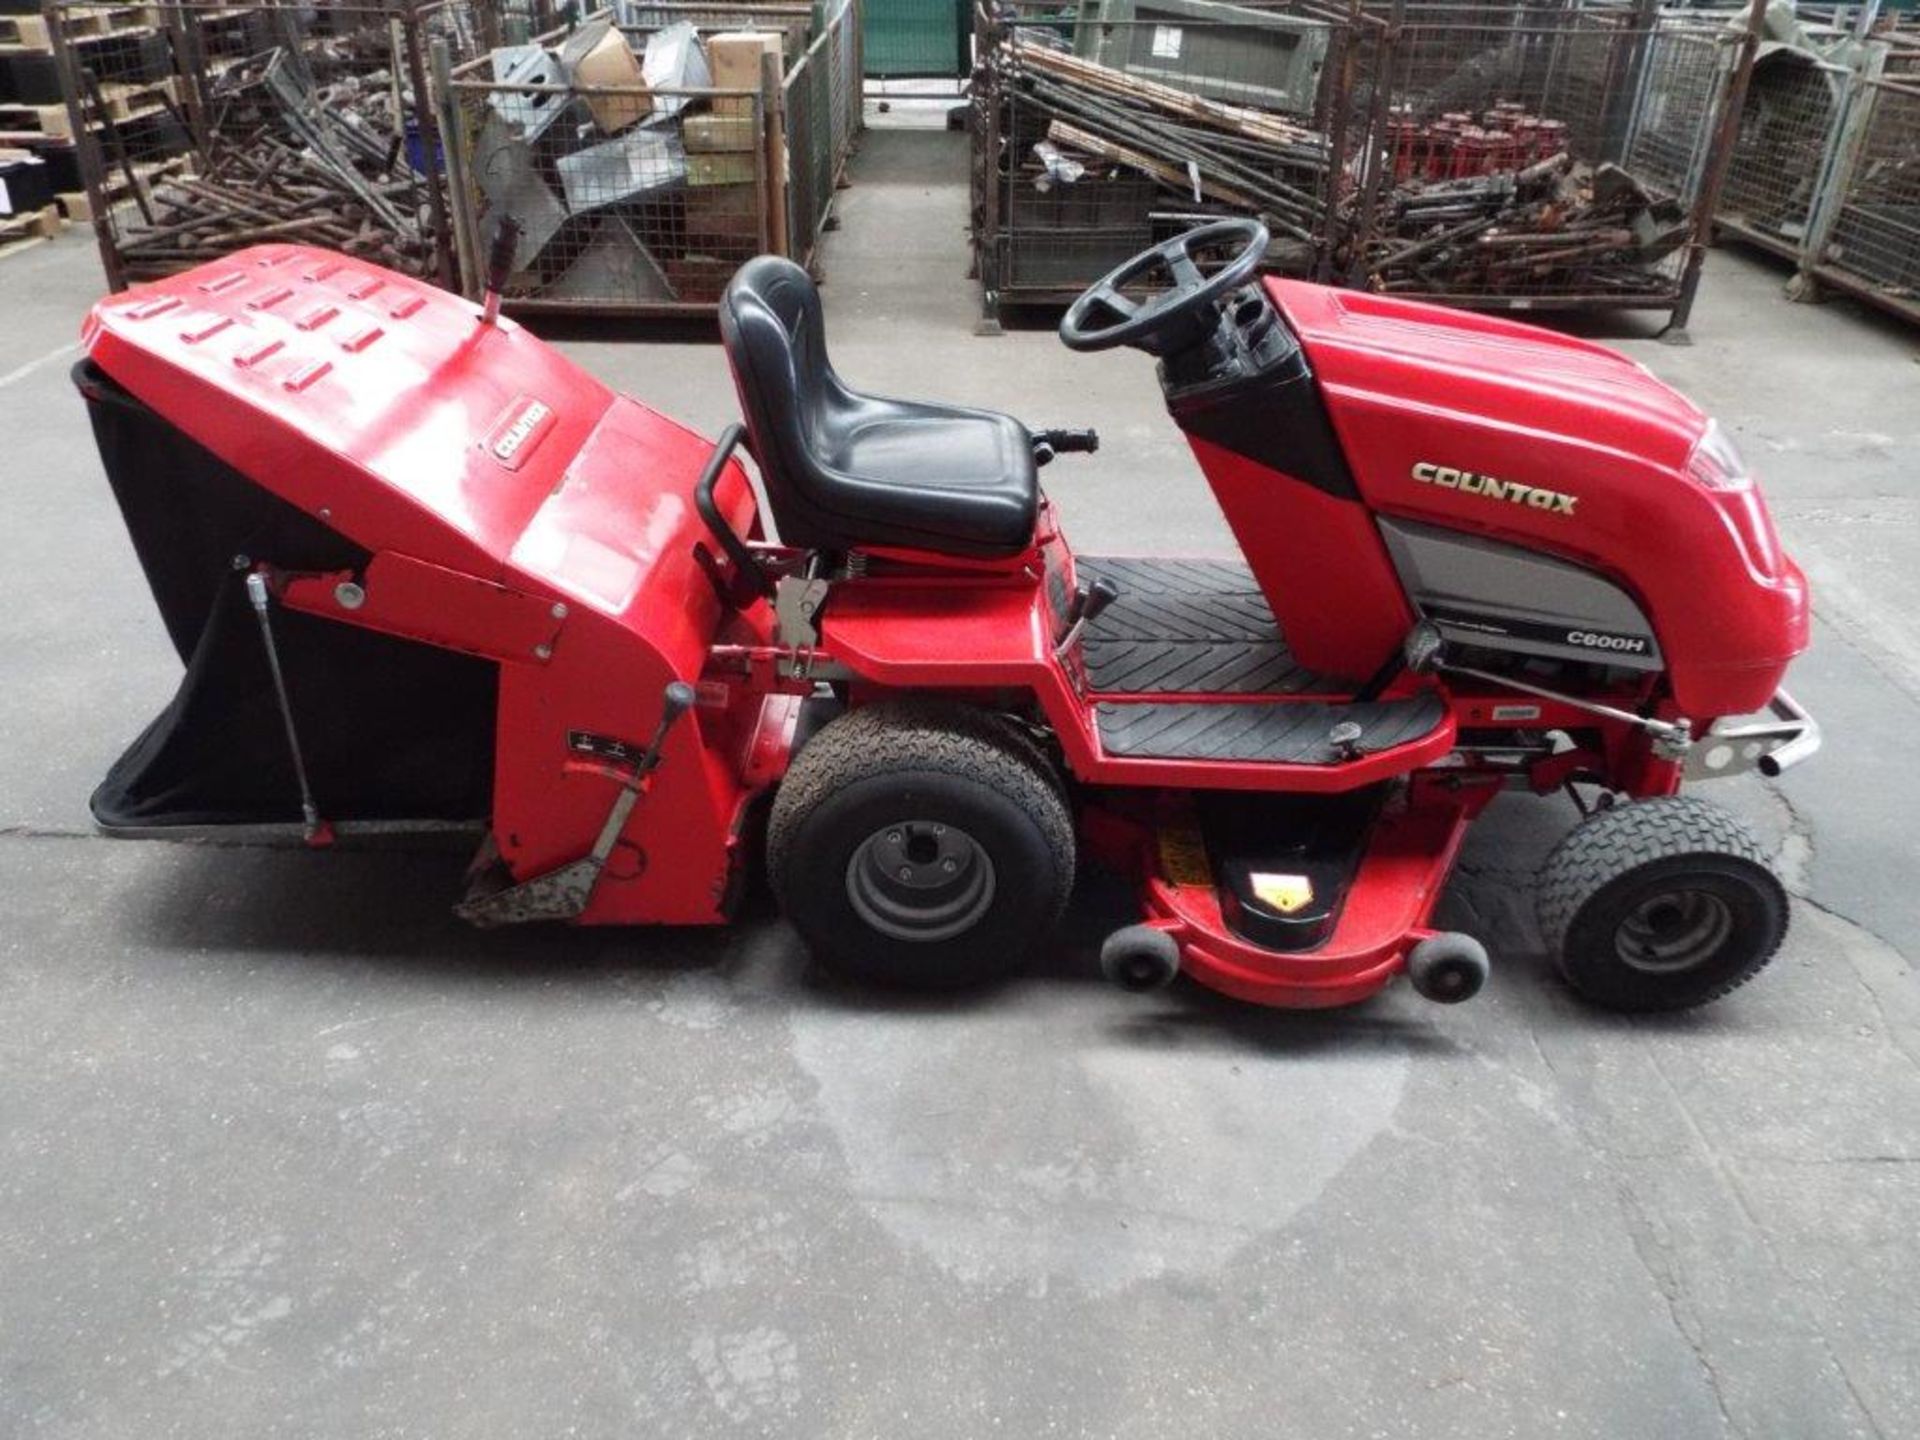 Countax C600H Ride On Mower with Rear Brush and Grass Collector - Image 8 of 22